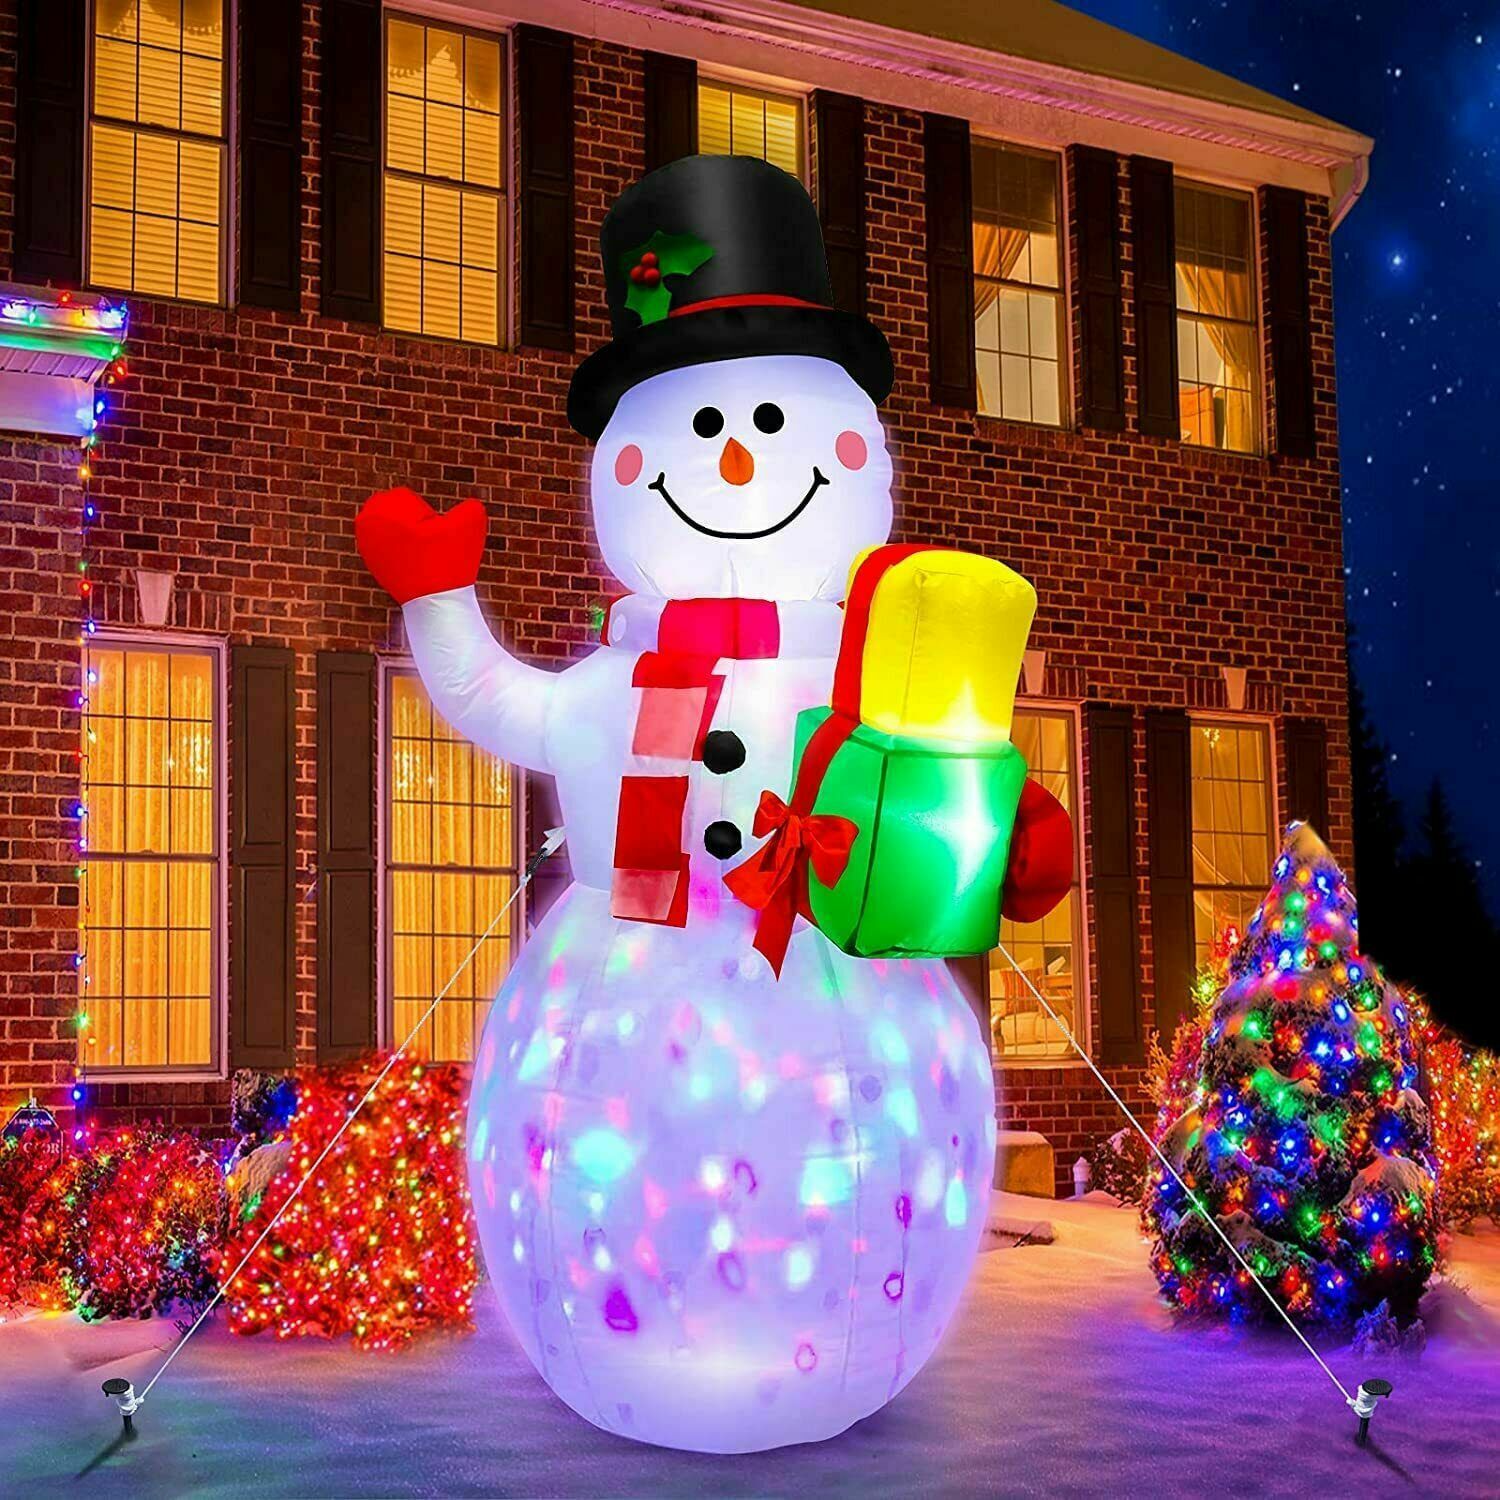 5ft Christmas Inflatables Snowman Outdoor Yard Decor with Rotating LED Lights Christmas Blow Up Decoration Garden - image 2 of 9